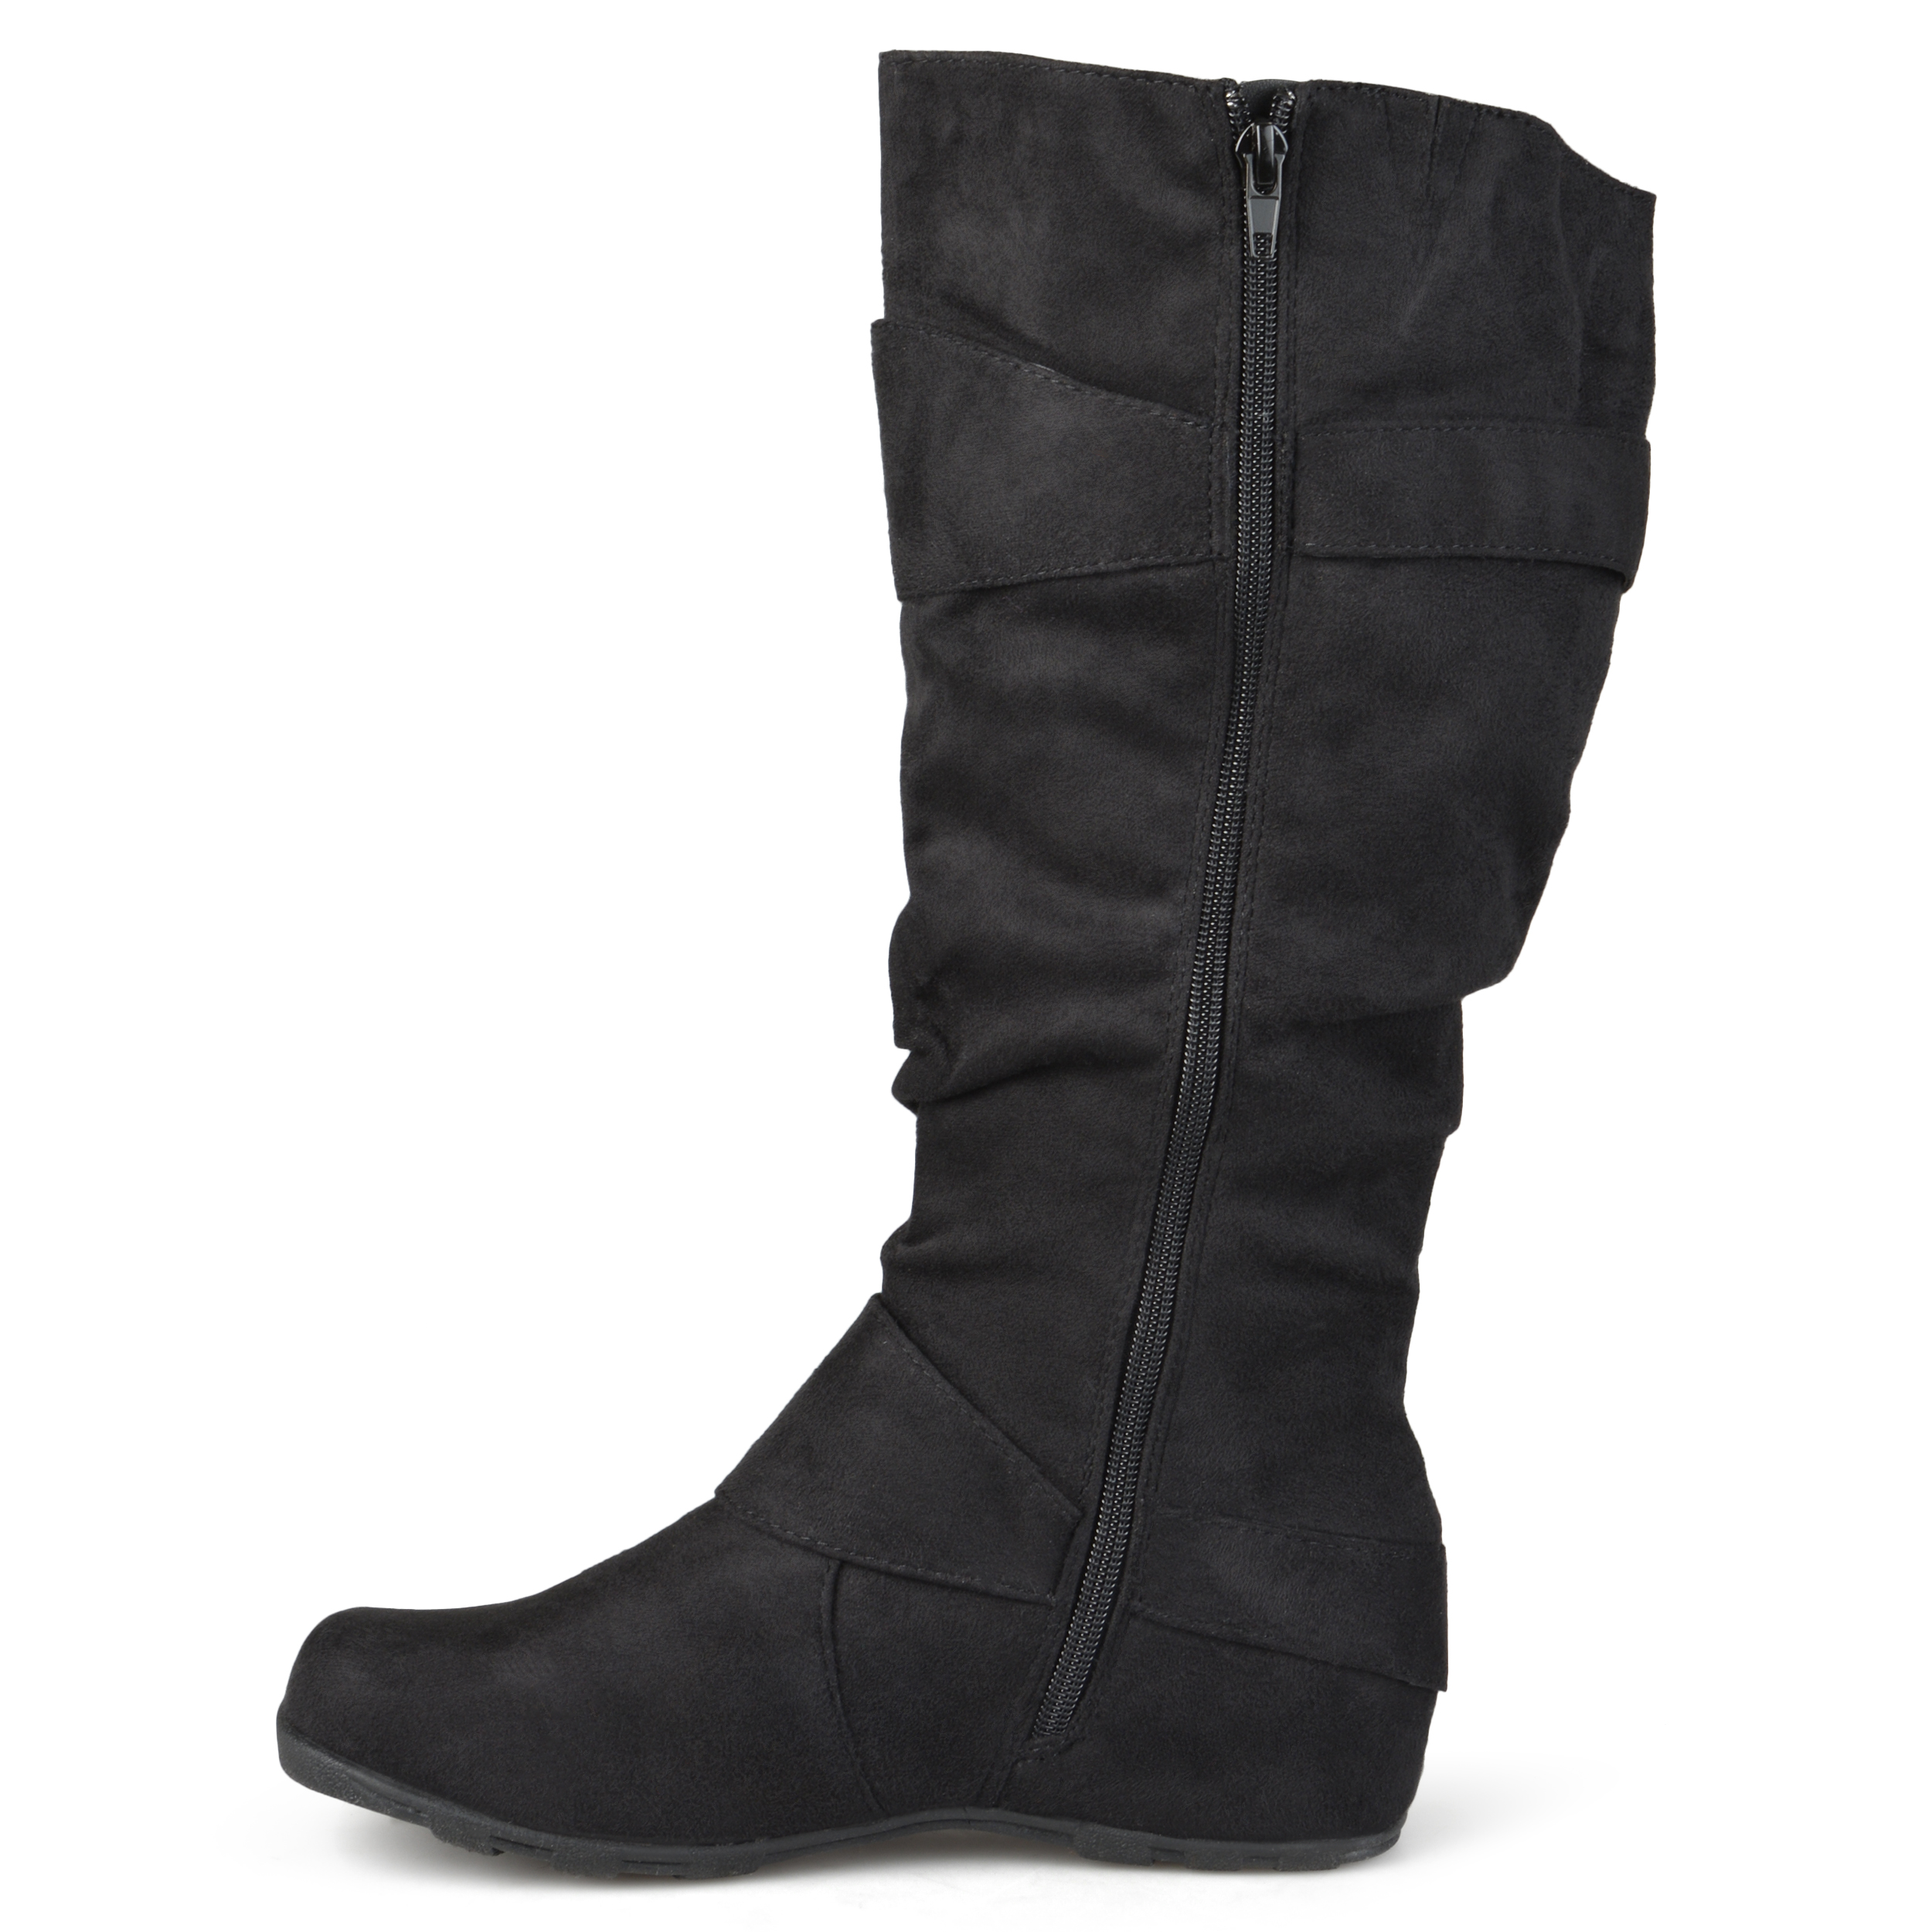 Brinley Co. Women's Extra Wide Calf Mid-Calf Slouch Riding Boots - image 3 of 8